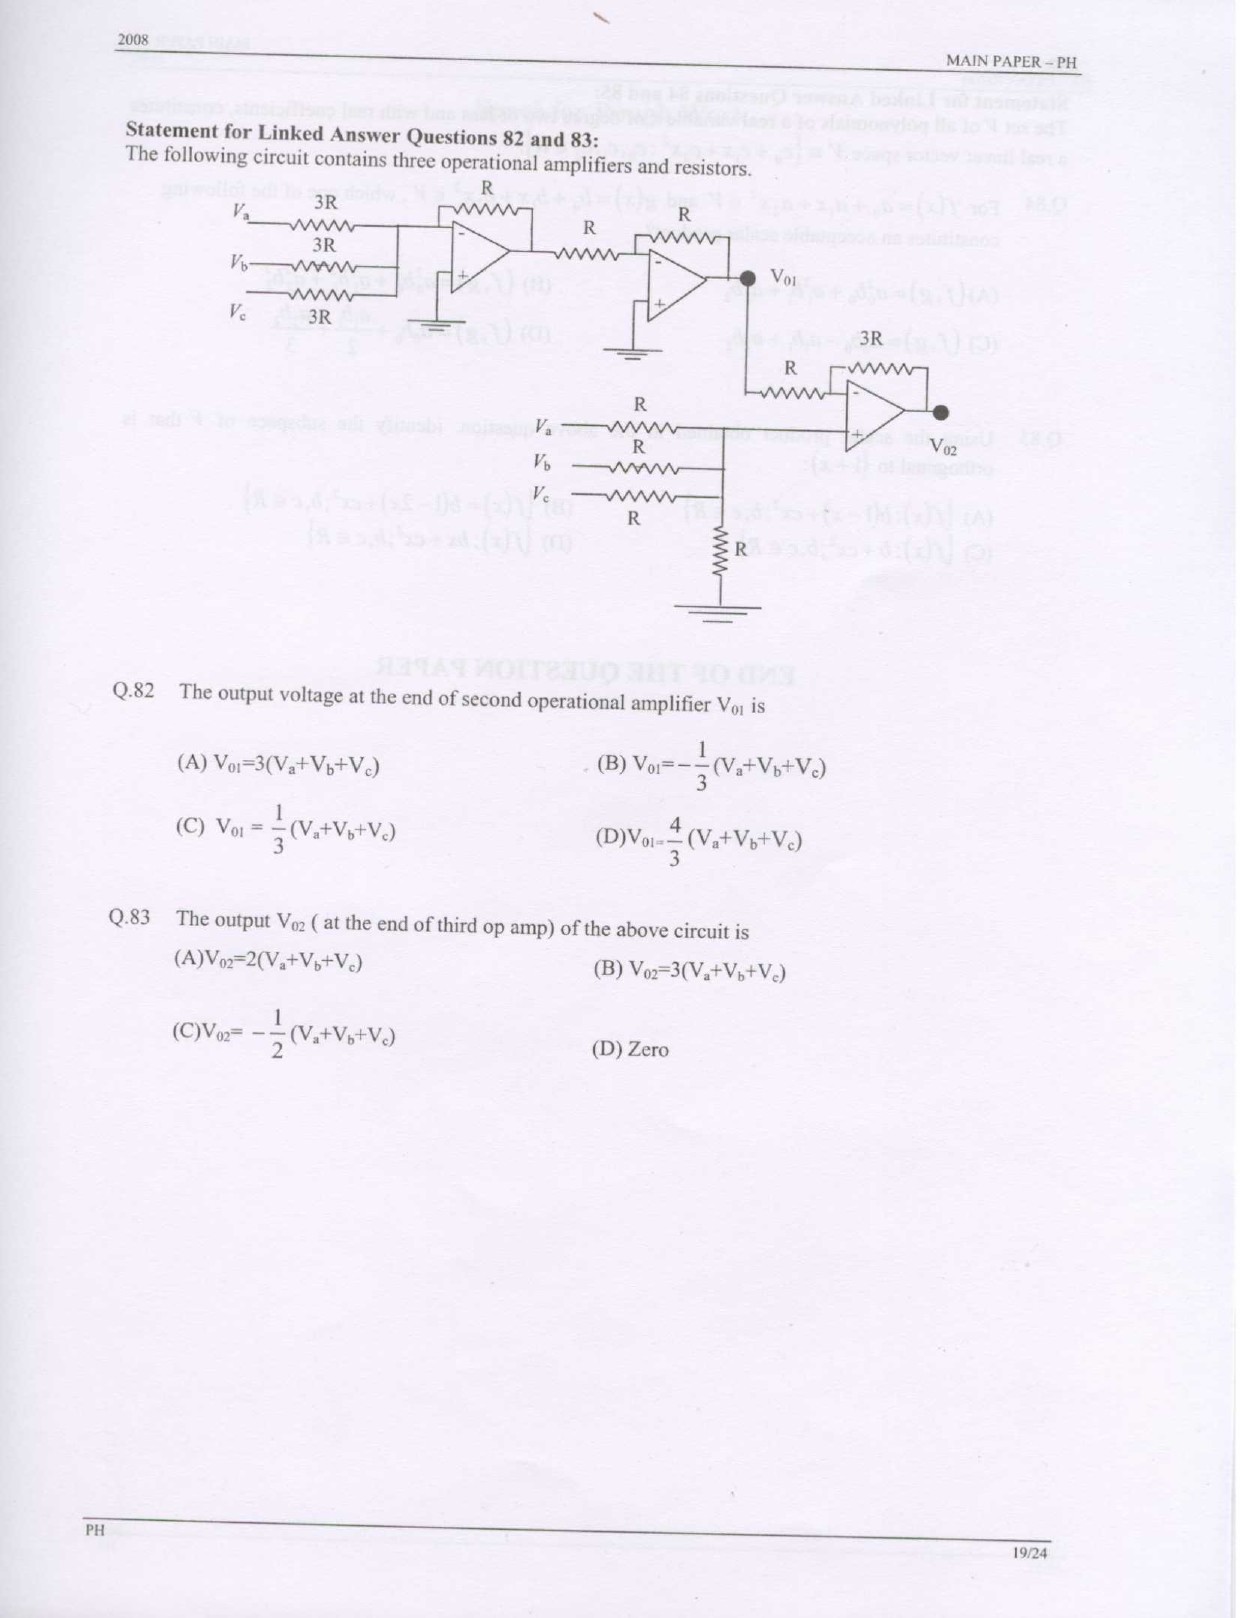 GATE Exam Question Paper 2008 Physics 19